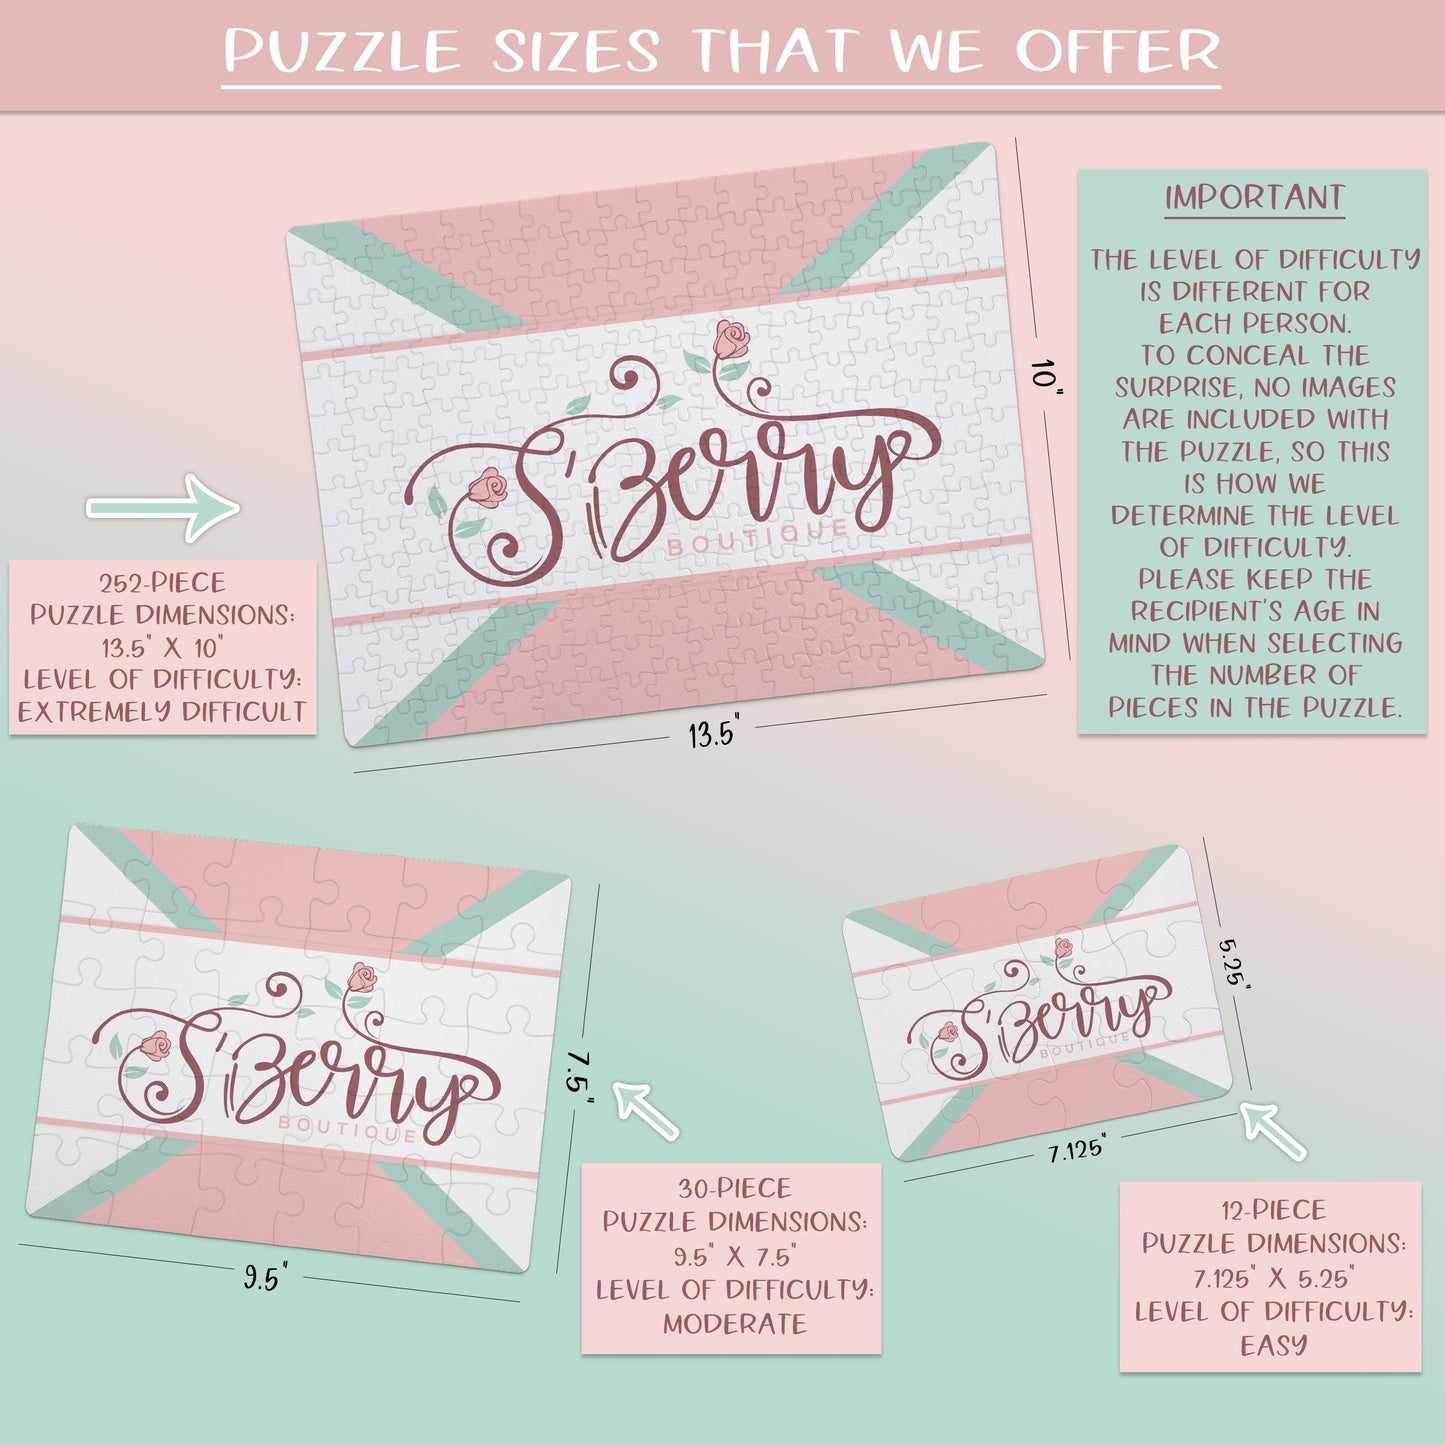 Create Your Own Puzzle - Watermelon Design - CYOP0268 | S'Berry Boutique